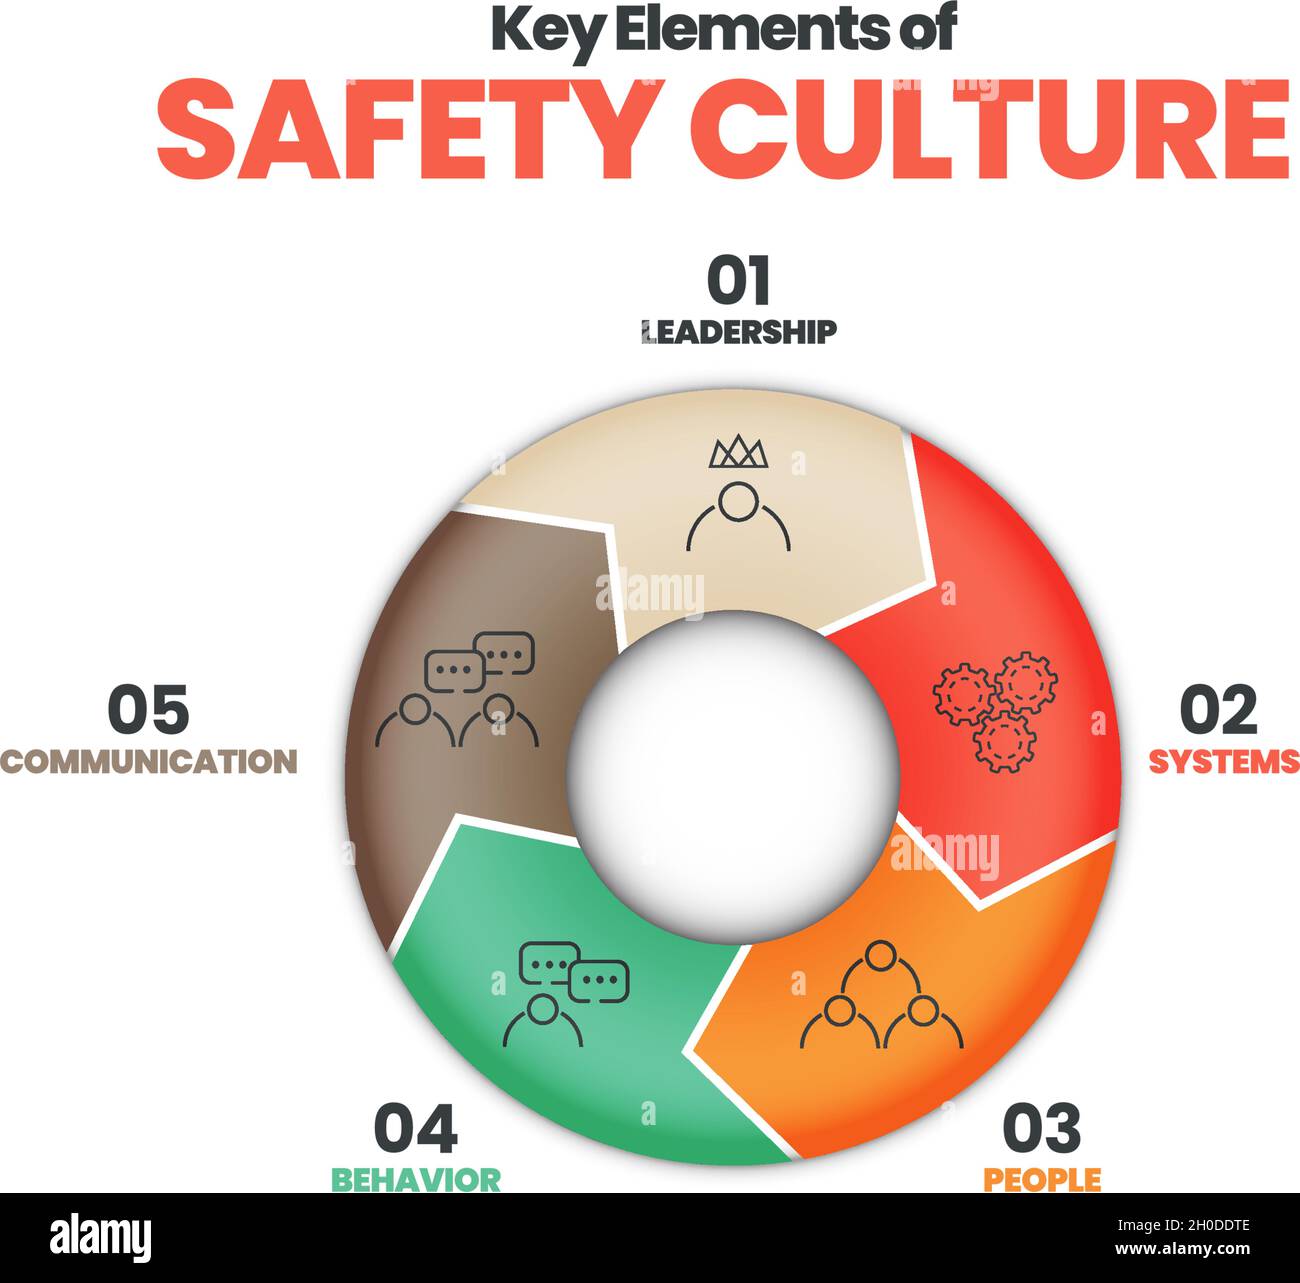 Vector diagram presentation layout is in safety culture concept. Illustration 5 elements of safety culture as leadership, systems, people and behavior. Stock Vector